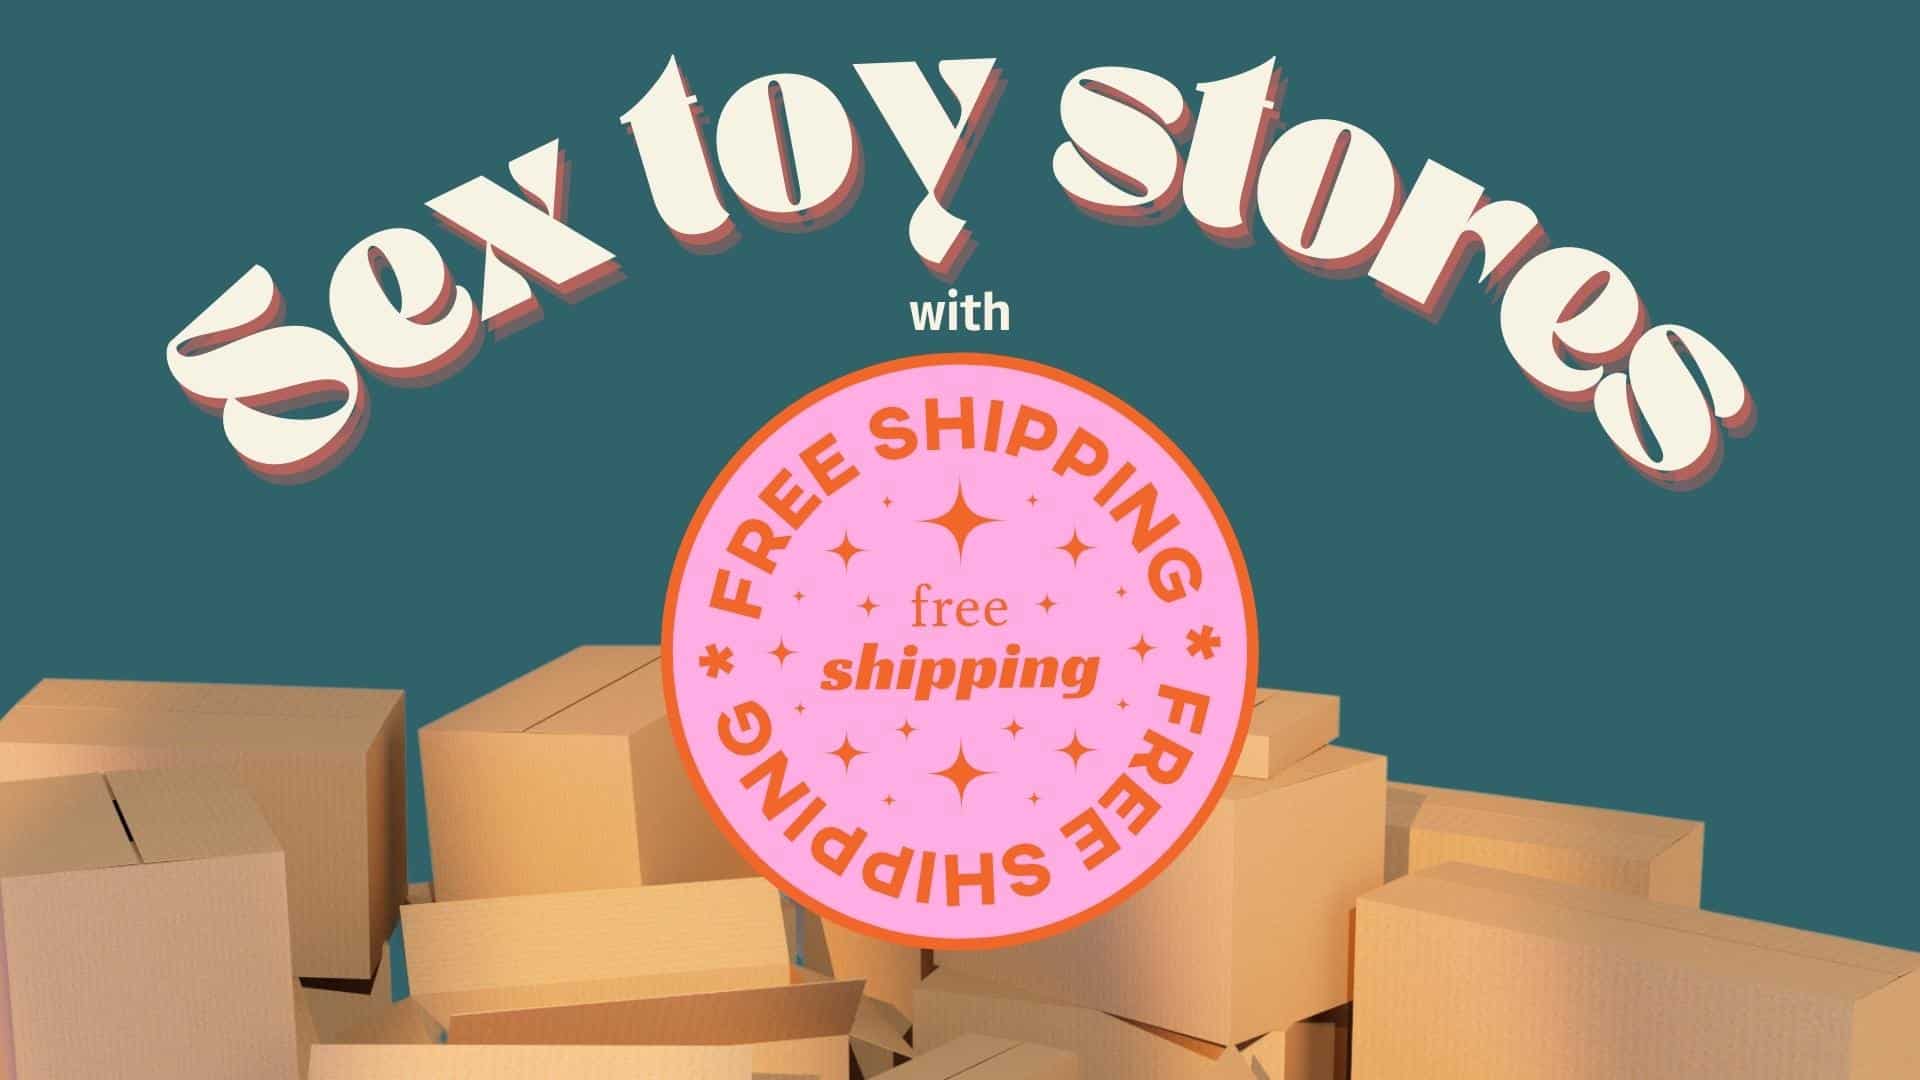 Online Sex Toy Stores With Free Shipping on Sex Toys